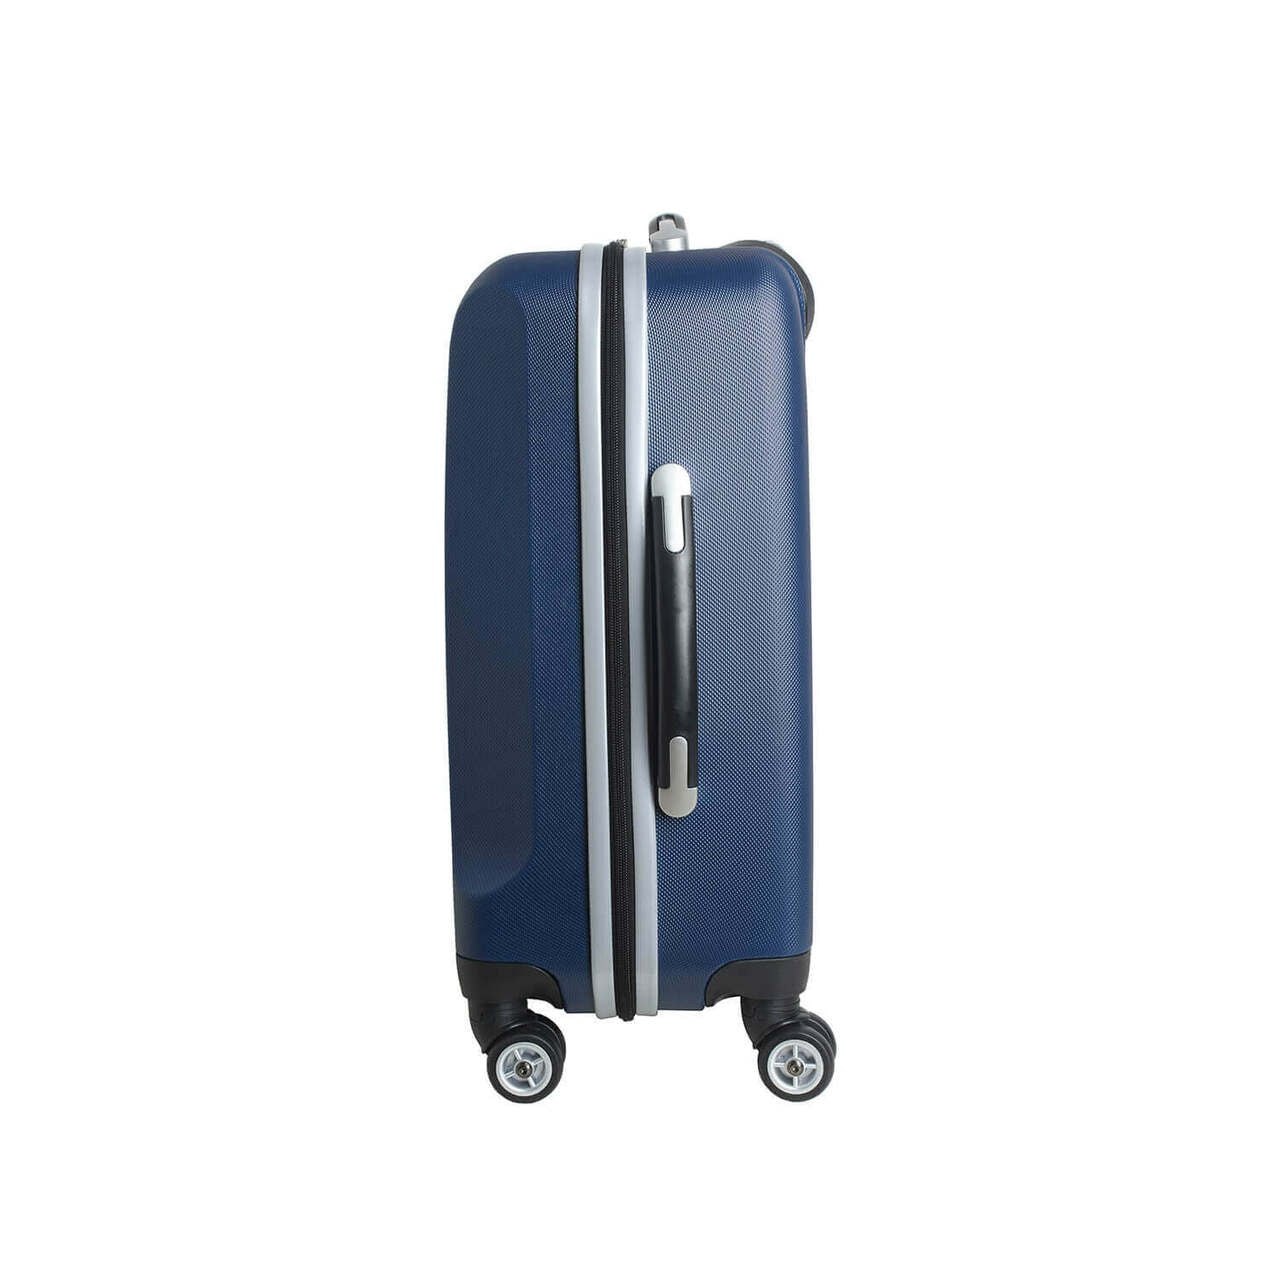 Personalized Initial Name letter "Z" 20 inches Carry on Hardcase Spinner Luggage by Mojo in NAVY